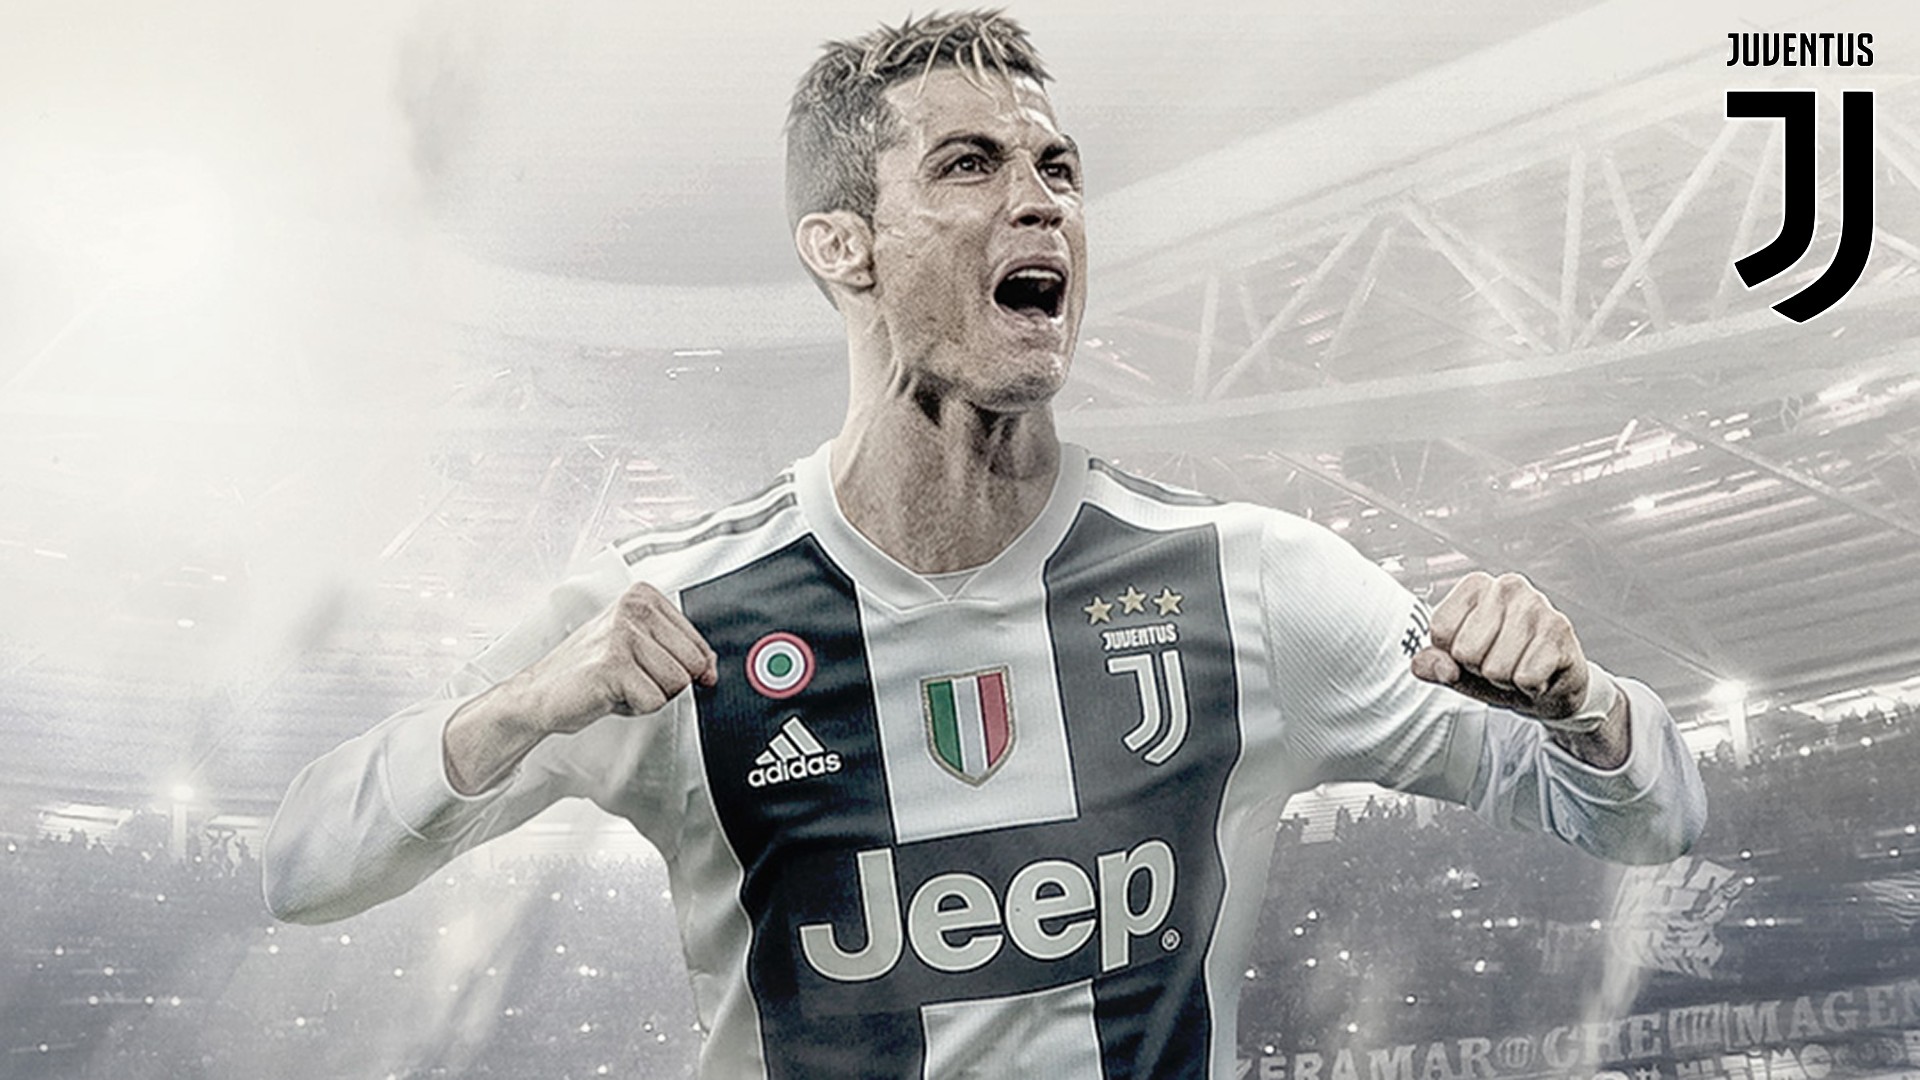 Wallpapers HD CR7 Juventus With Resolution 1920X1080 pixel. You can make this wallpaper for your Mac or Windows Desktop Background, iPhone, Android or Tablet and another Smartphone device for free